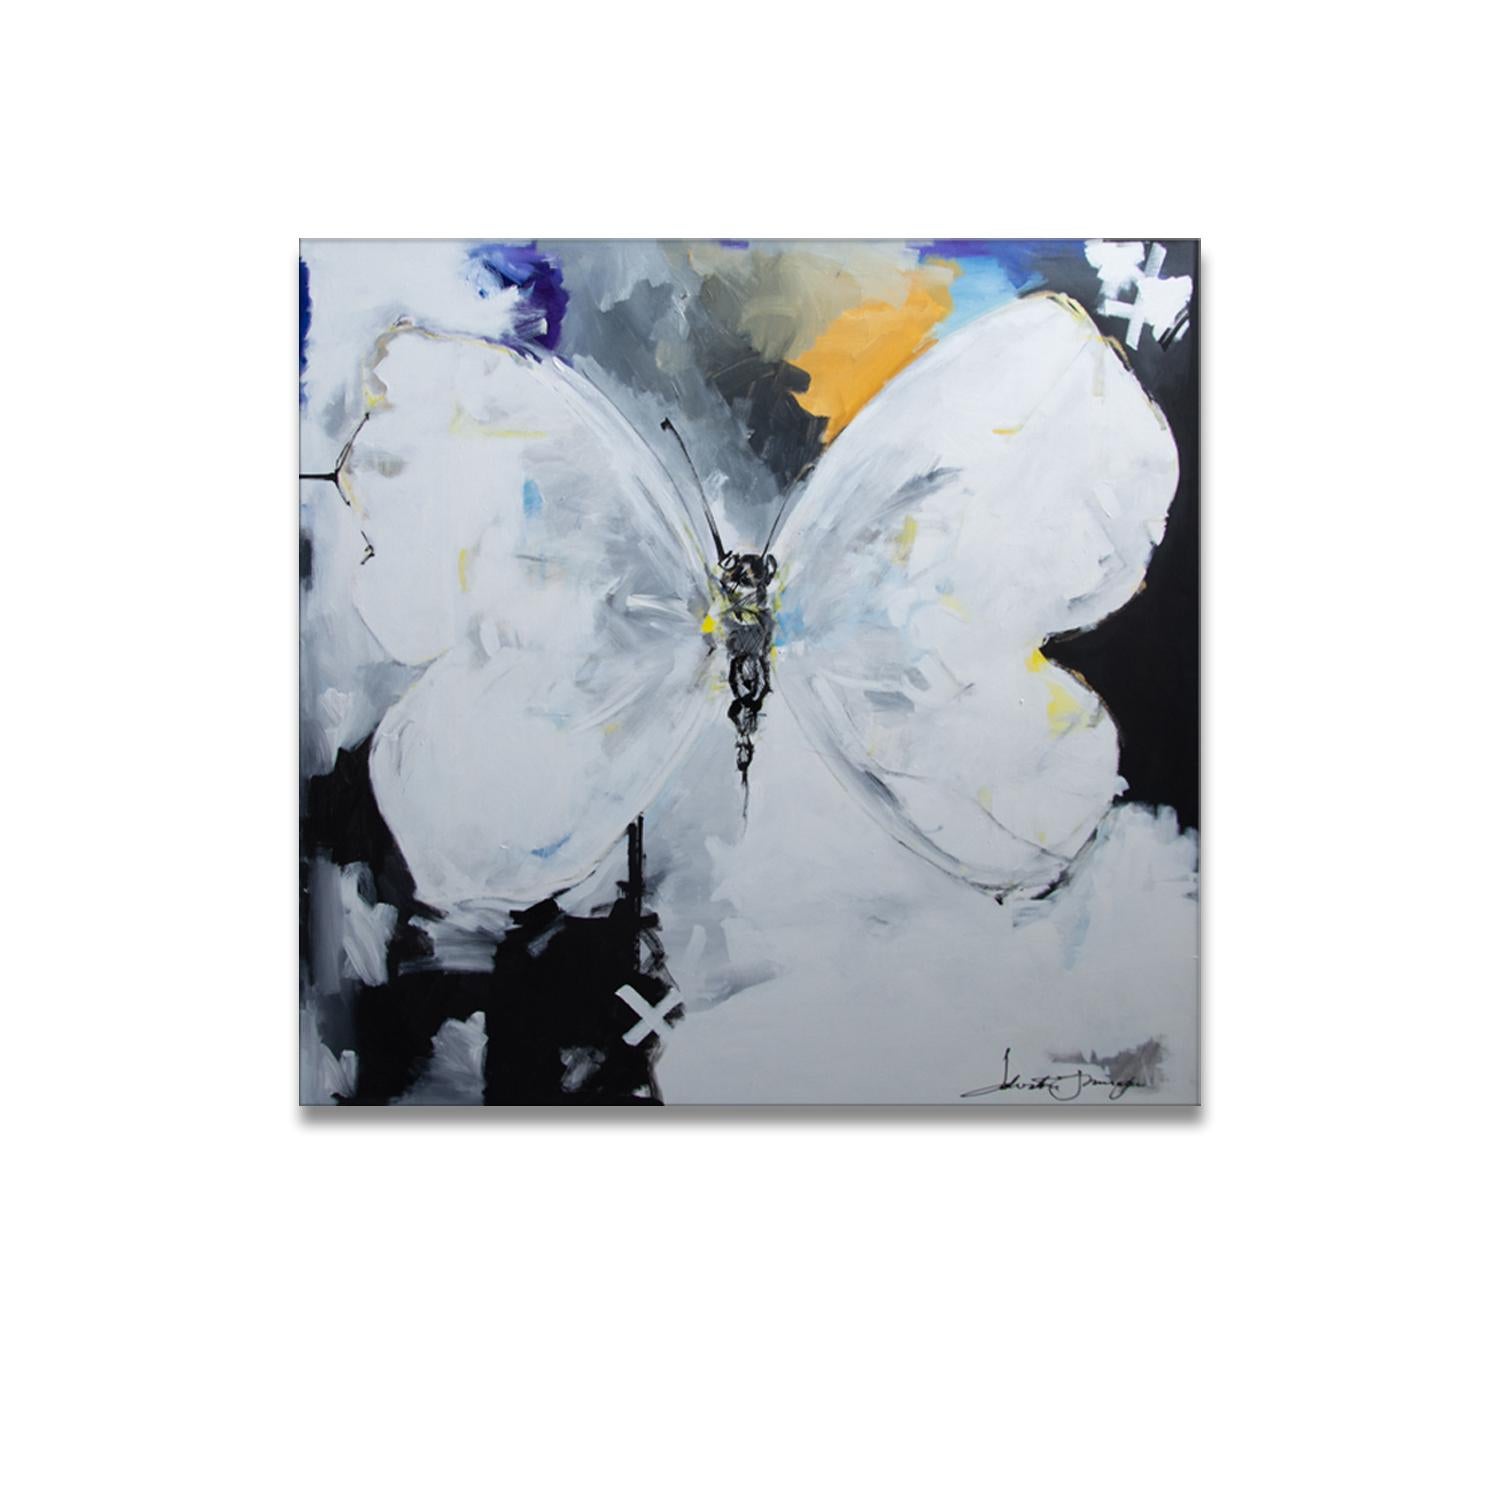 "Purity" original artwork by renowned artist Salvatore Principe, is unmistakably bold and contemporary. The piece features a butterfly with white, black, yellow, and blue while utilizing a combination of hard lines and soft blending, Salvatore's